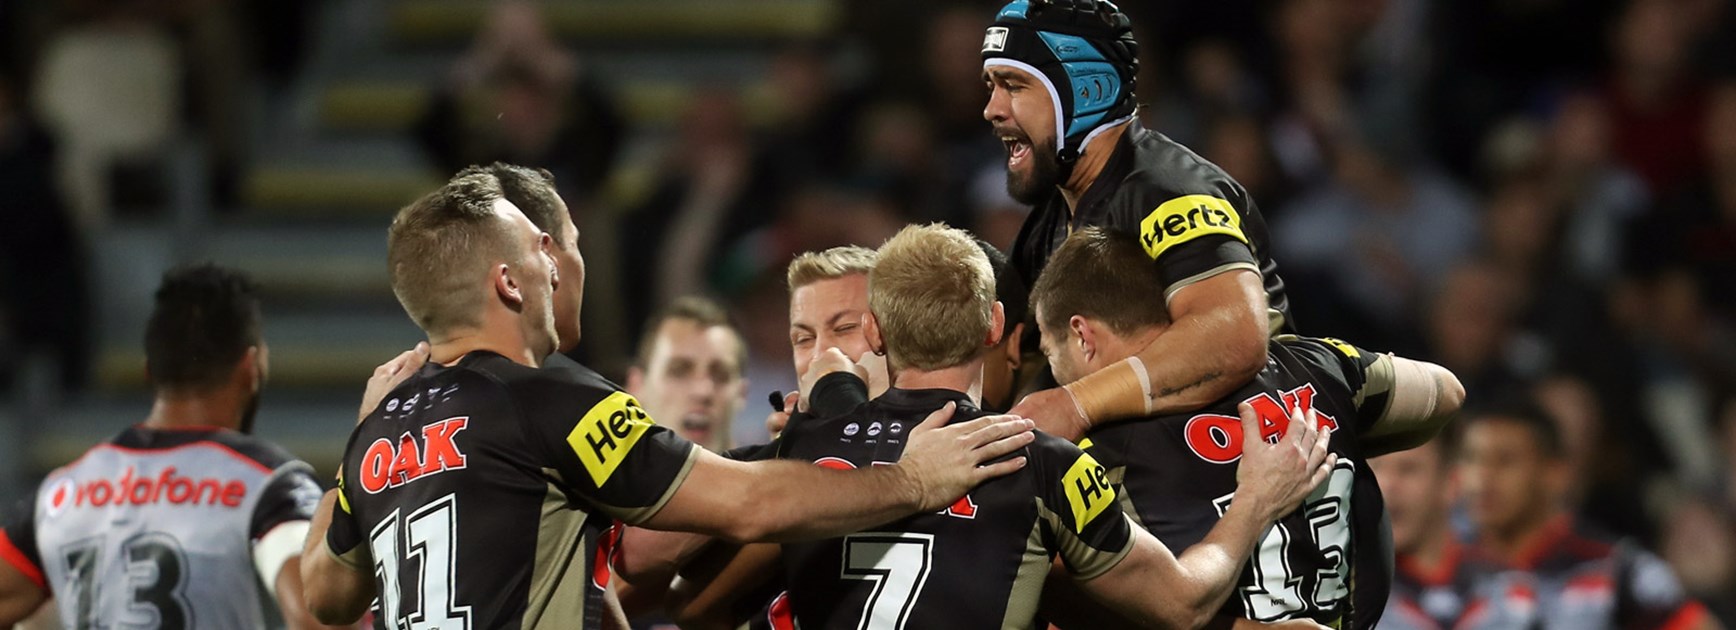 Panthers players celebrate against the Warriors in Round 10.